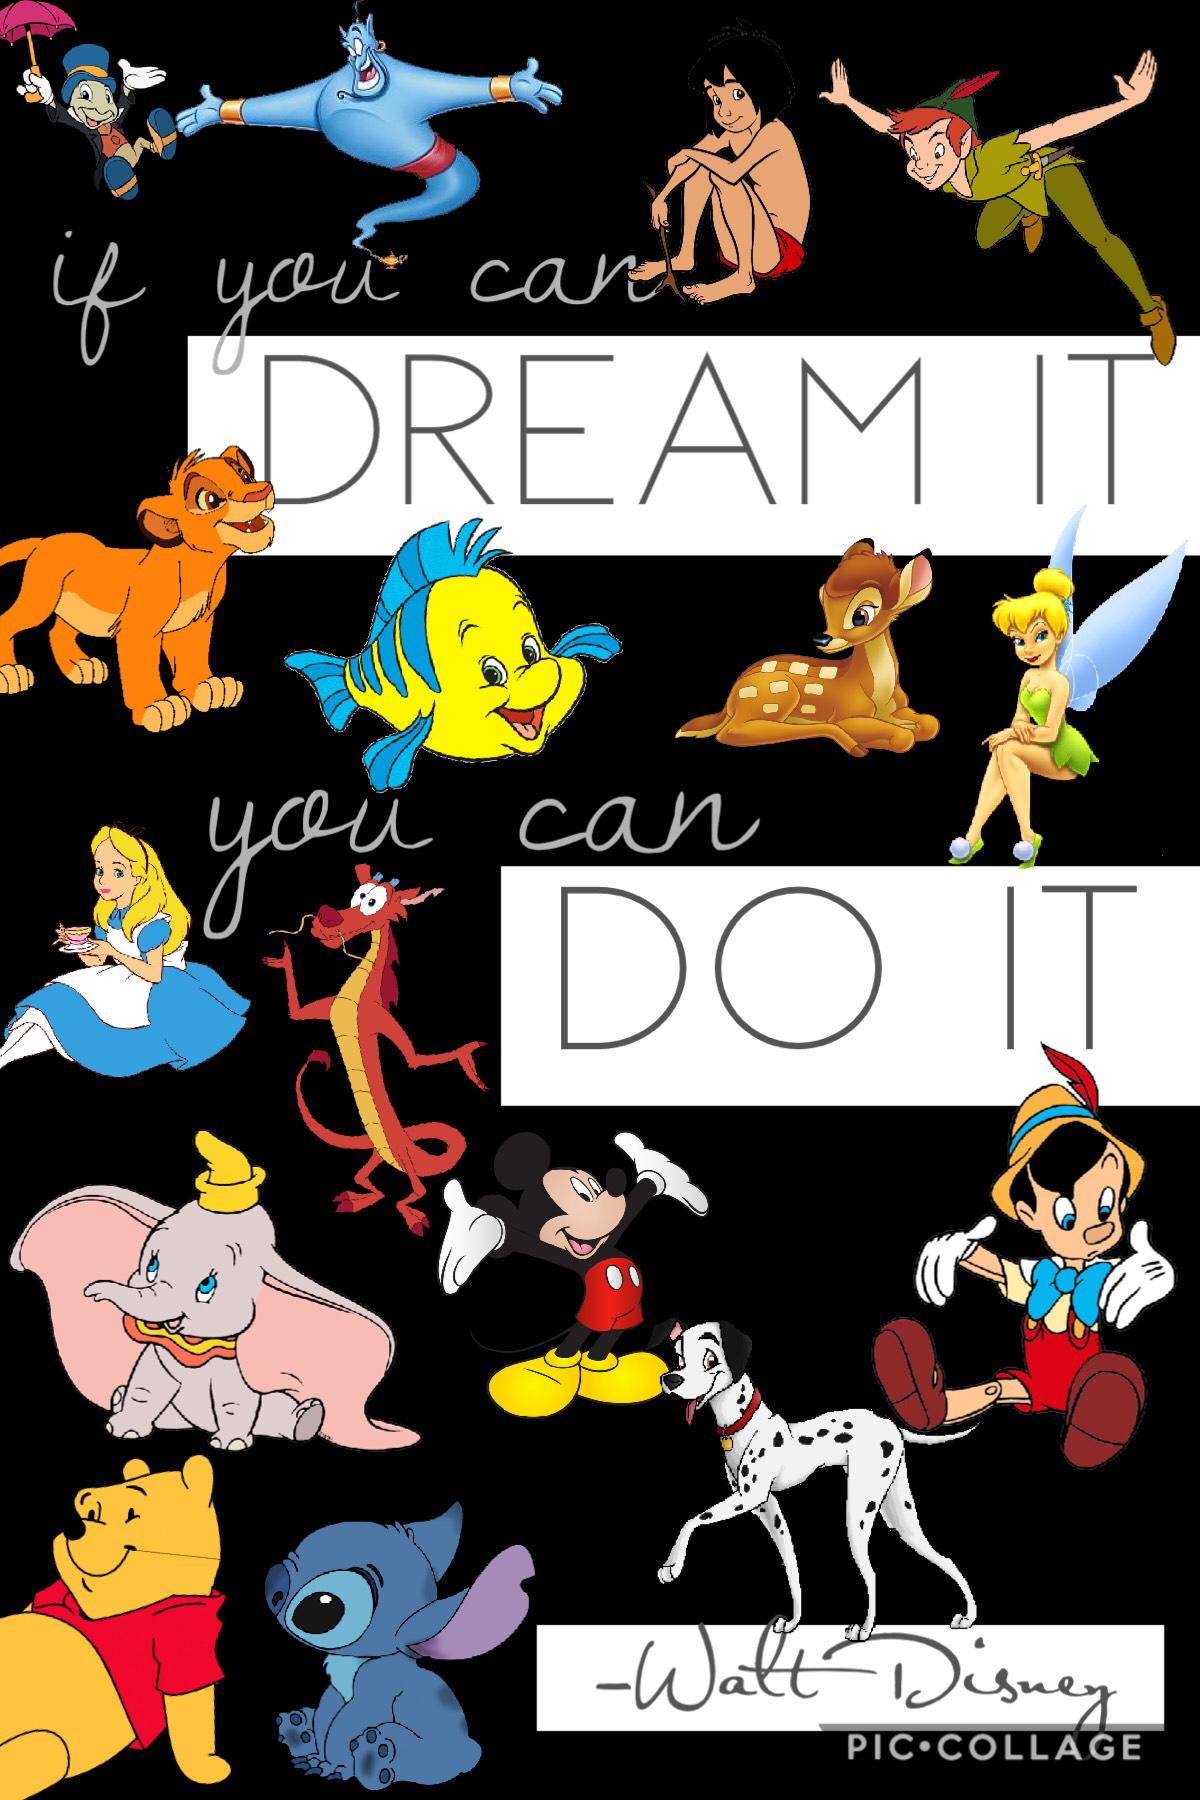 “If you can dream it, you can do it” -Walt Disney